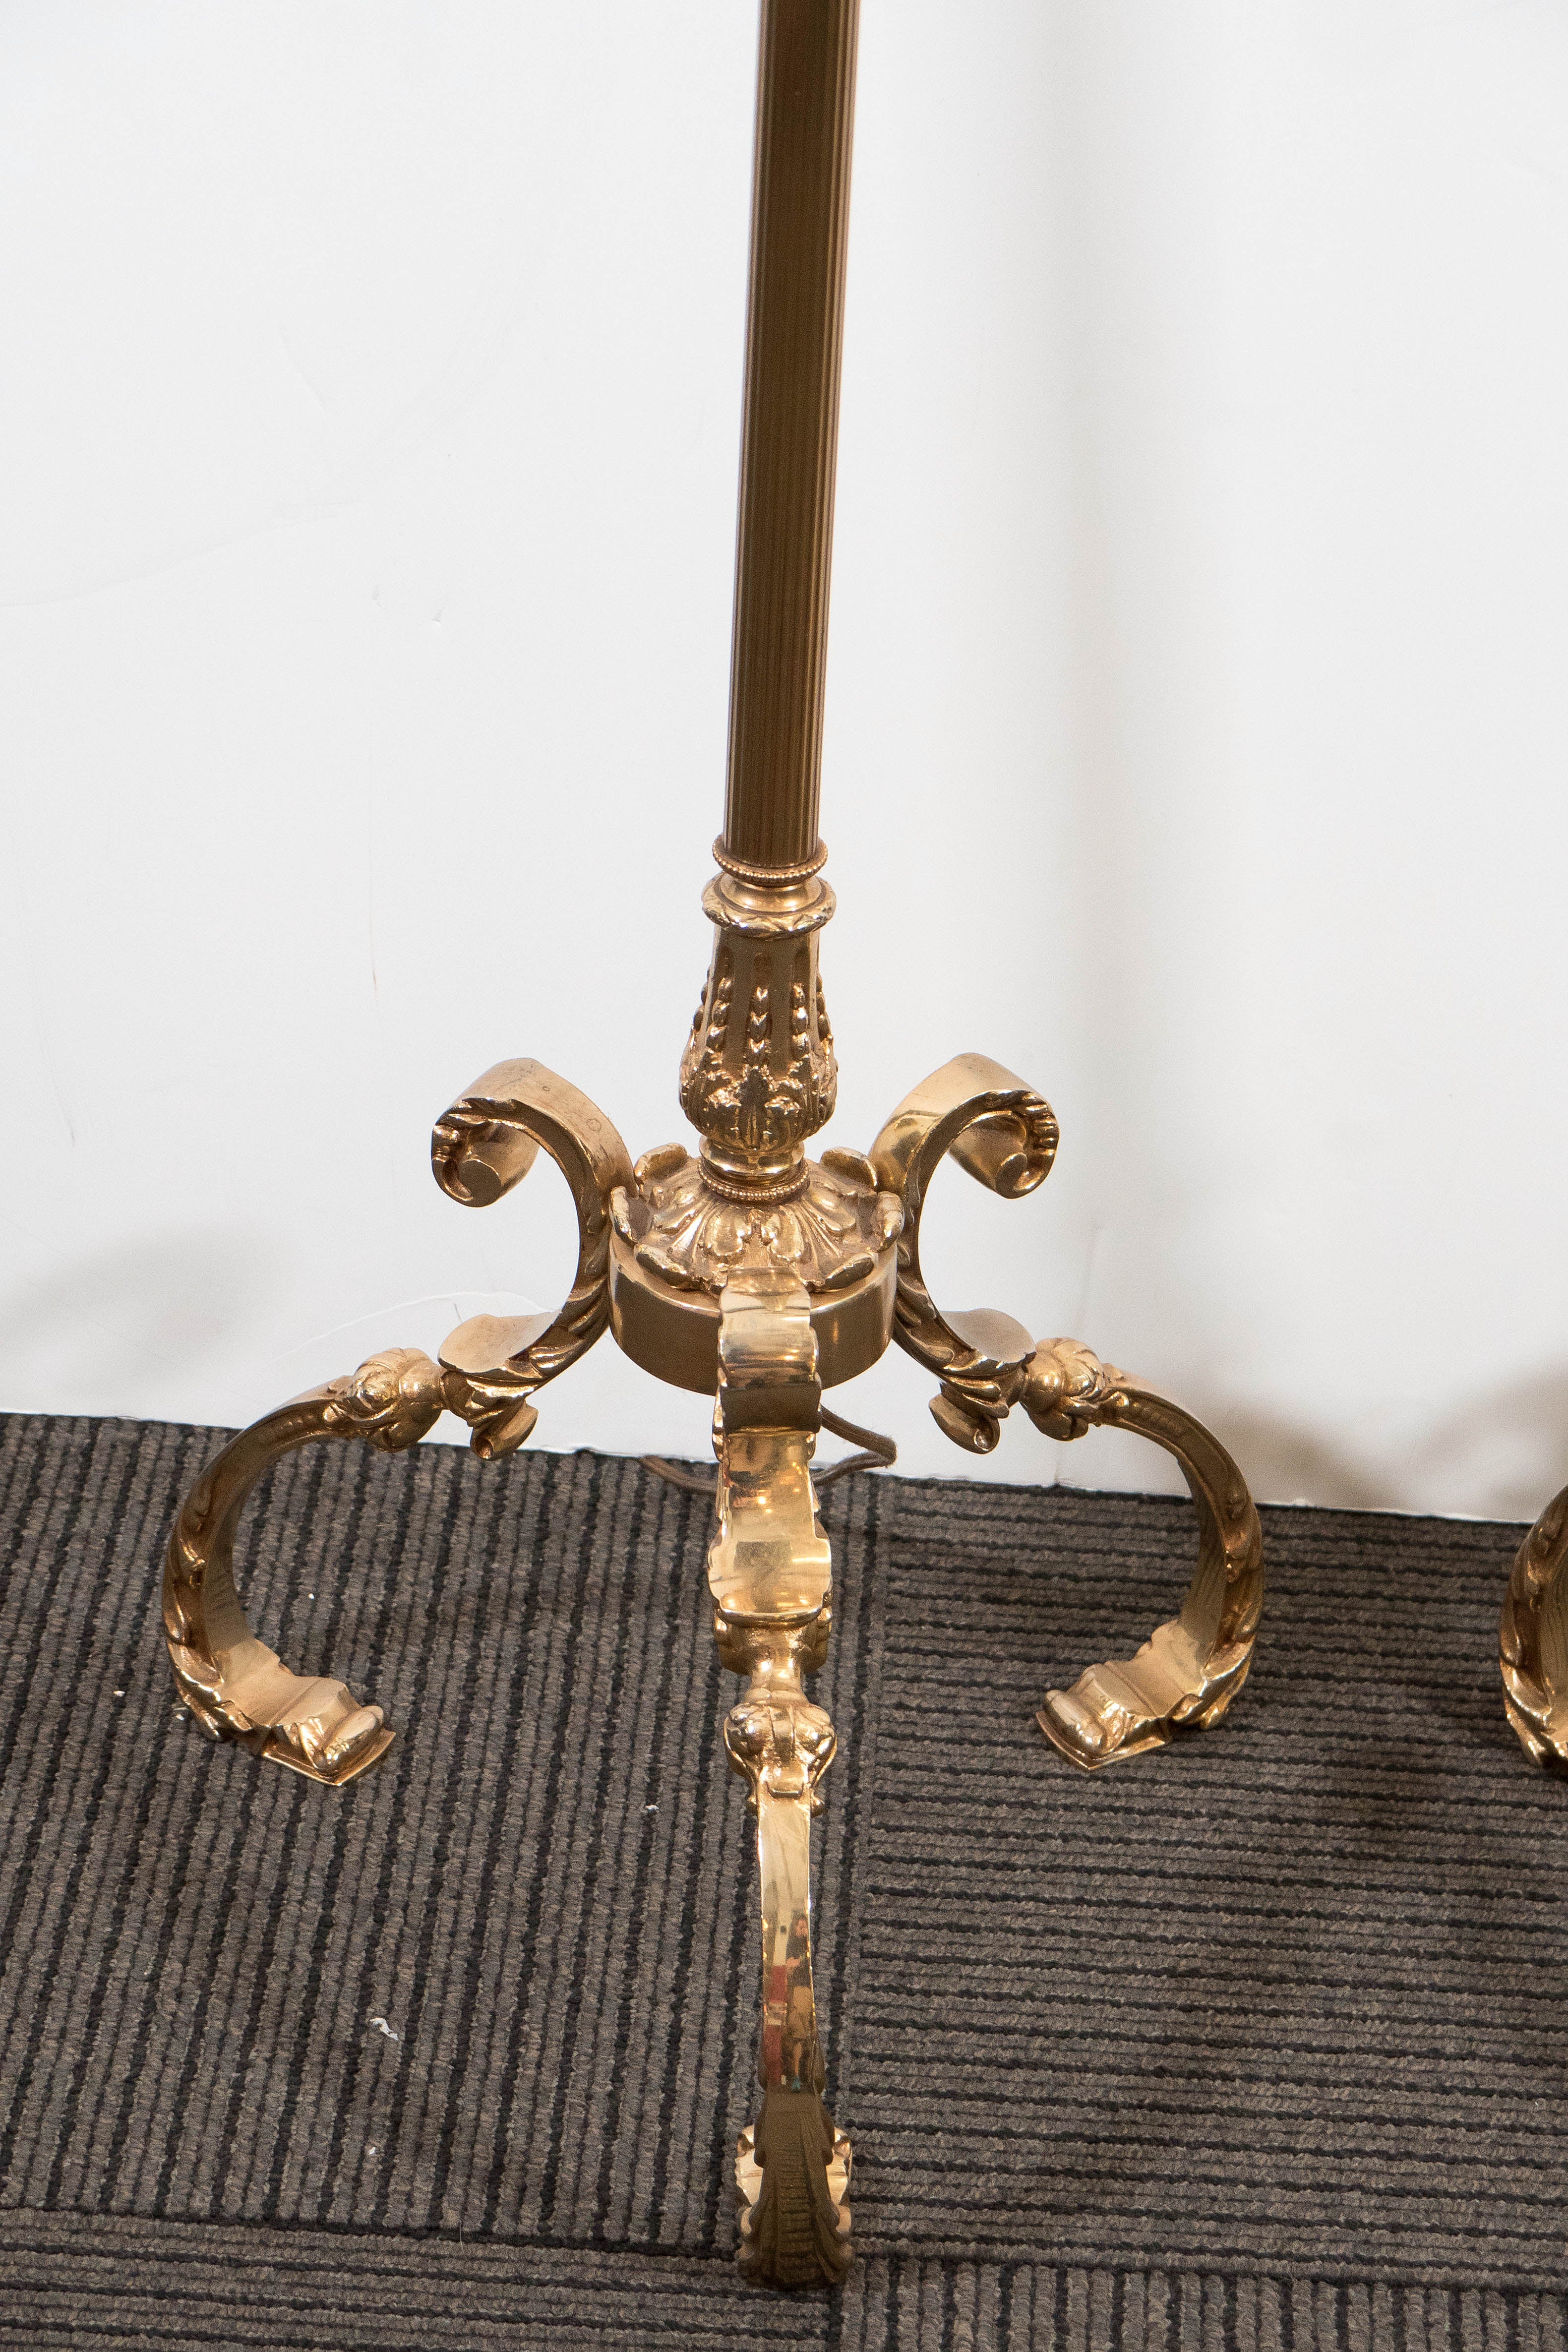 A pair of vintage, Hollywood Regency brass floor lamps, produced by the Marbro Lamp Company of Los Angeles, California, with double cluster sockets (each with pull chain), over reeded, classically styled stem, with decorative acanthus bobeche and